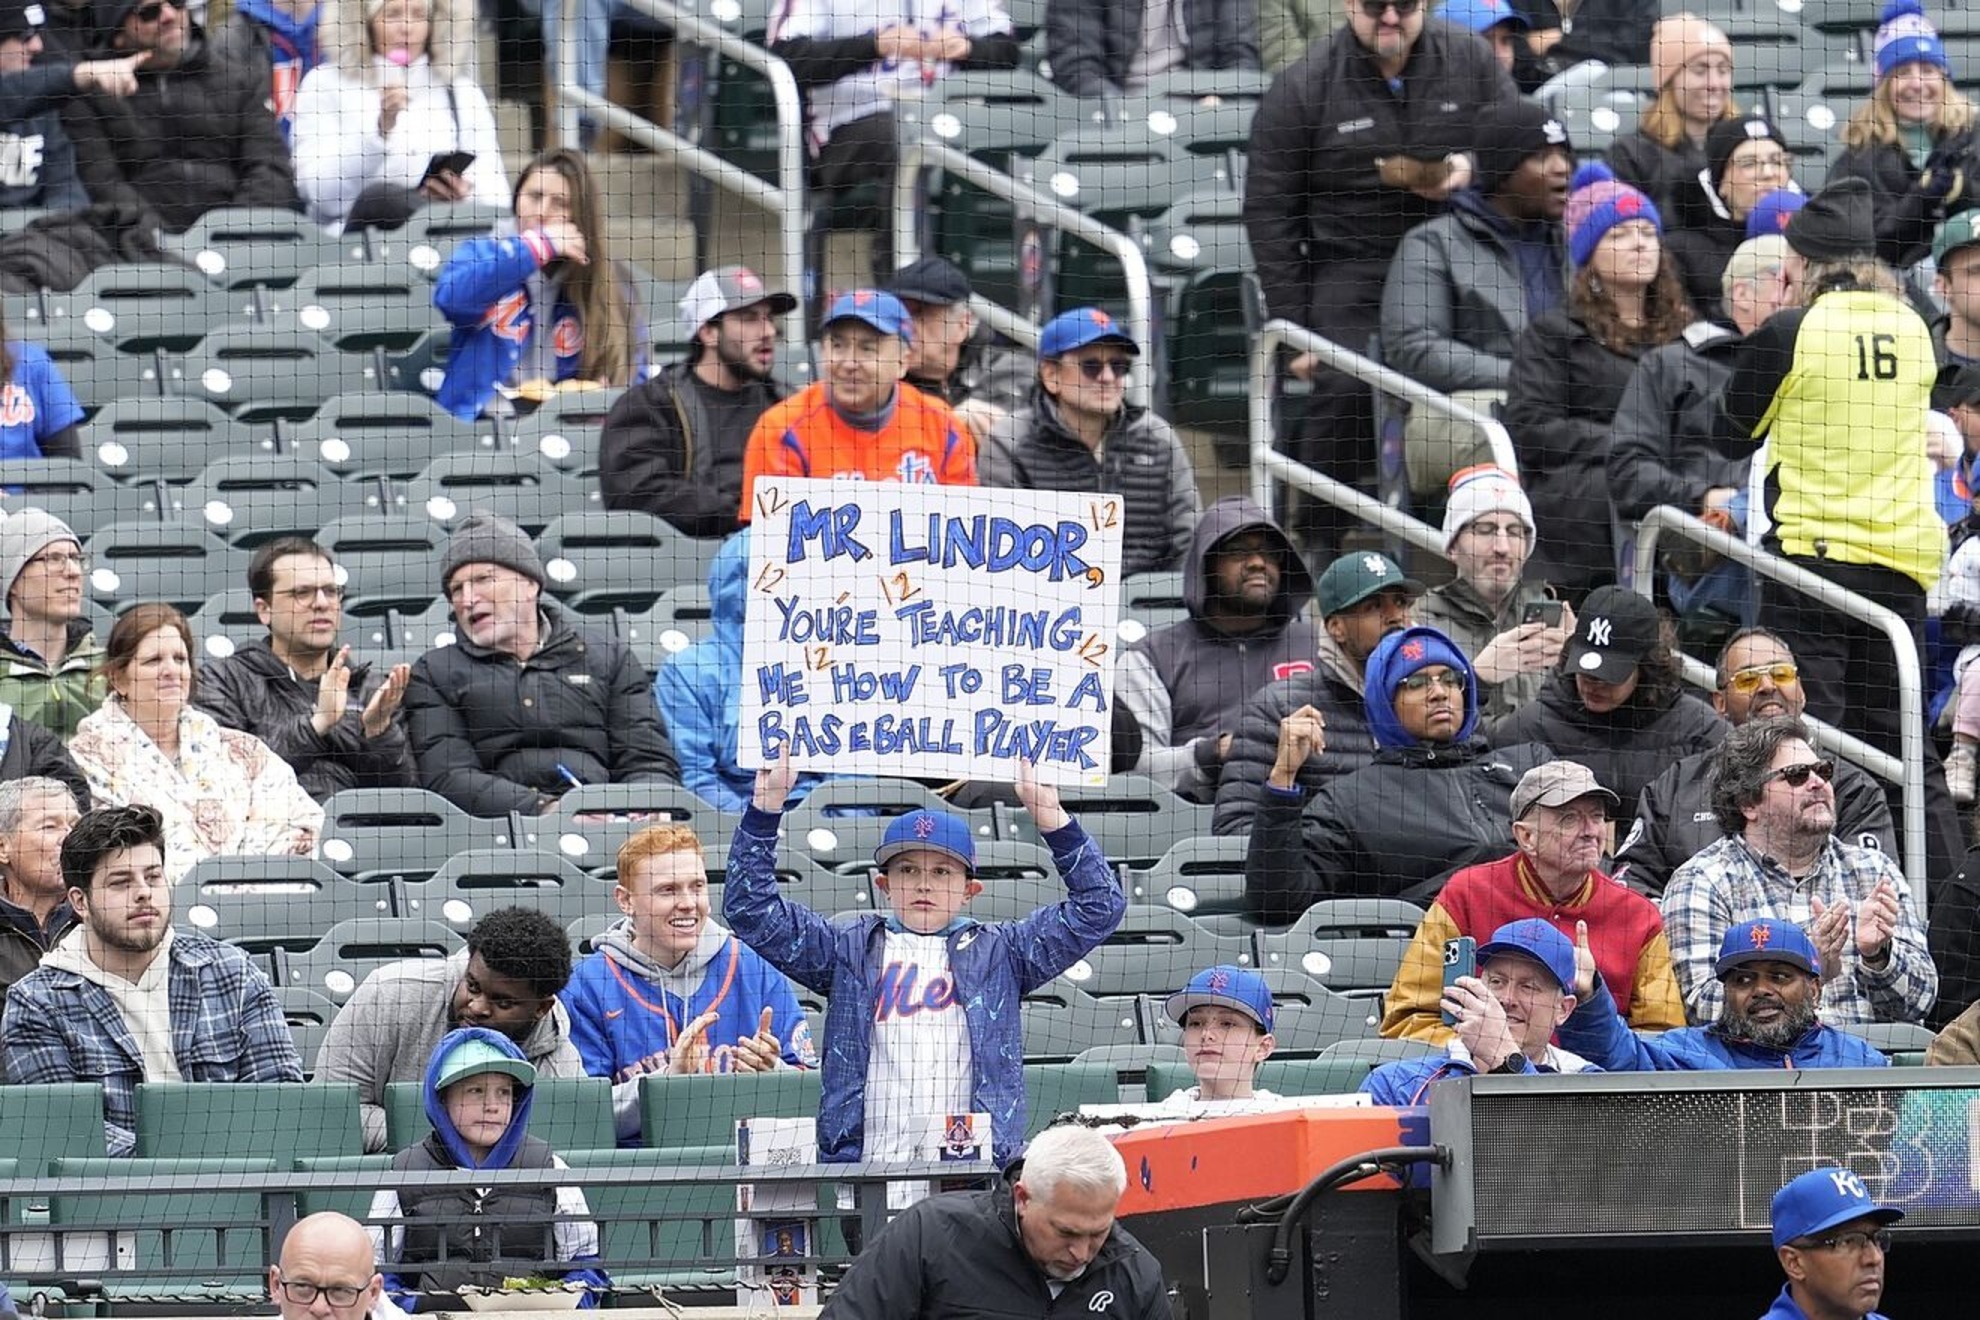 Francisco Lindor has been strongly supported by Mets fans